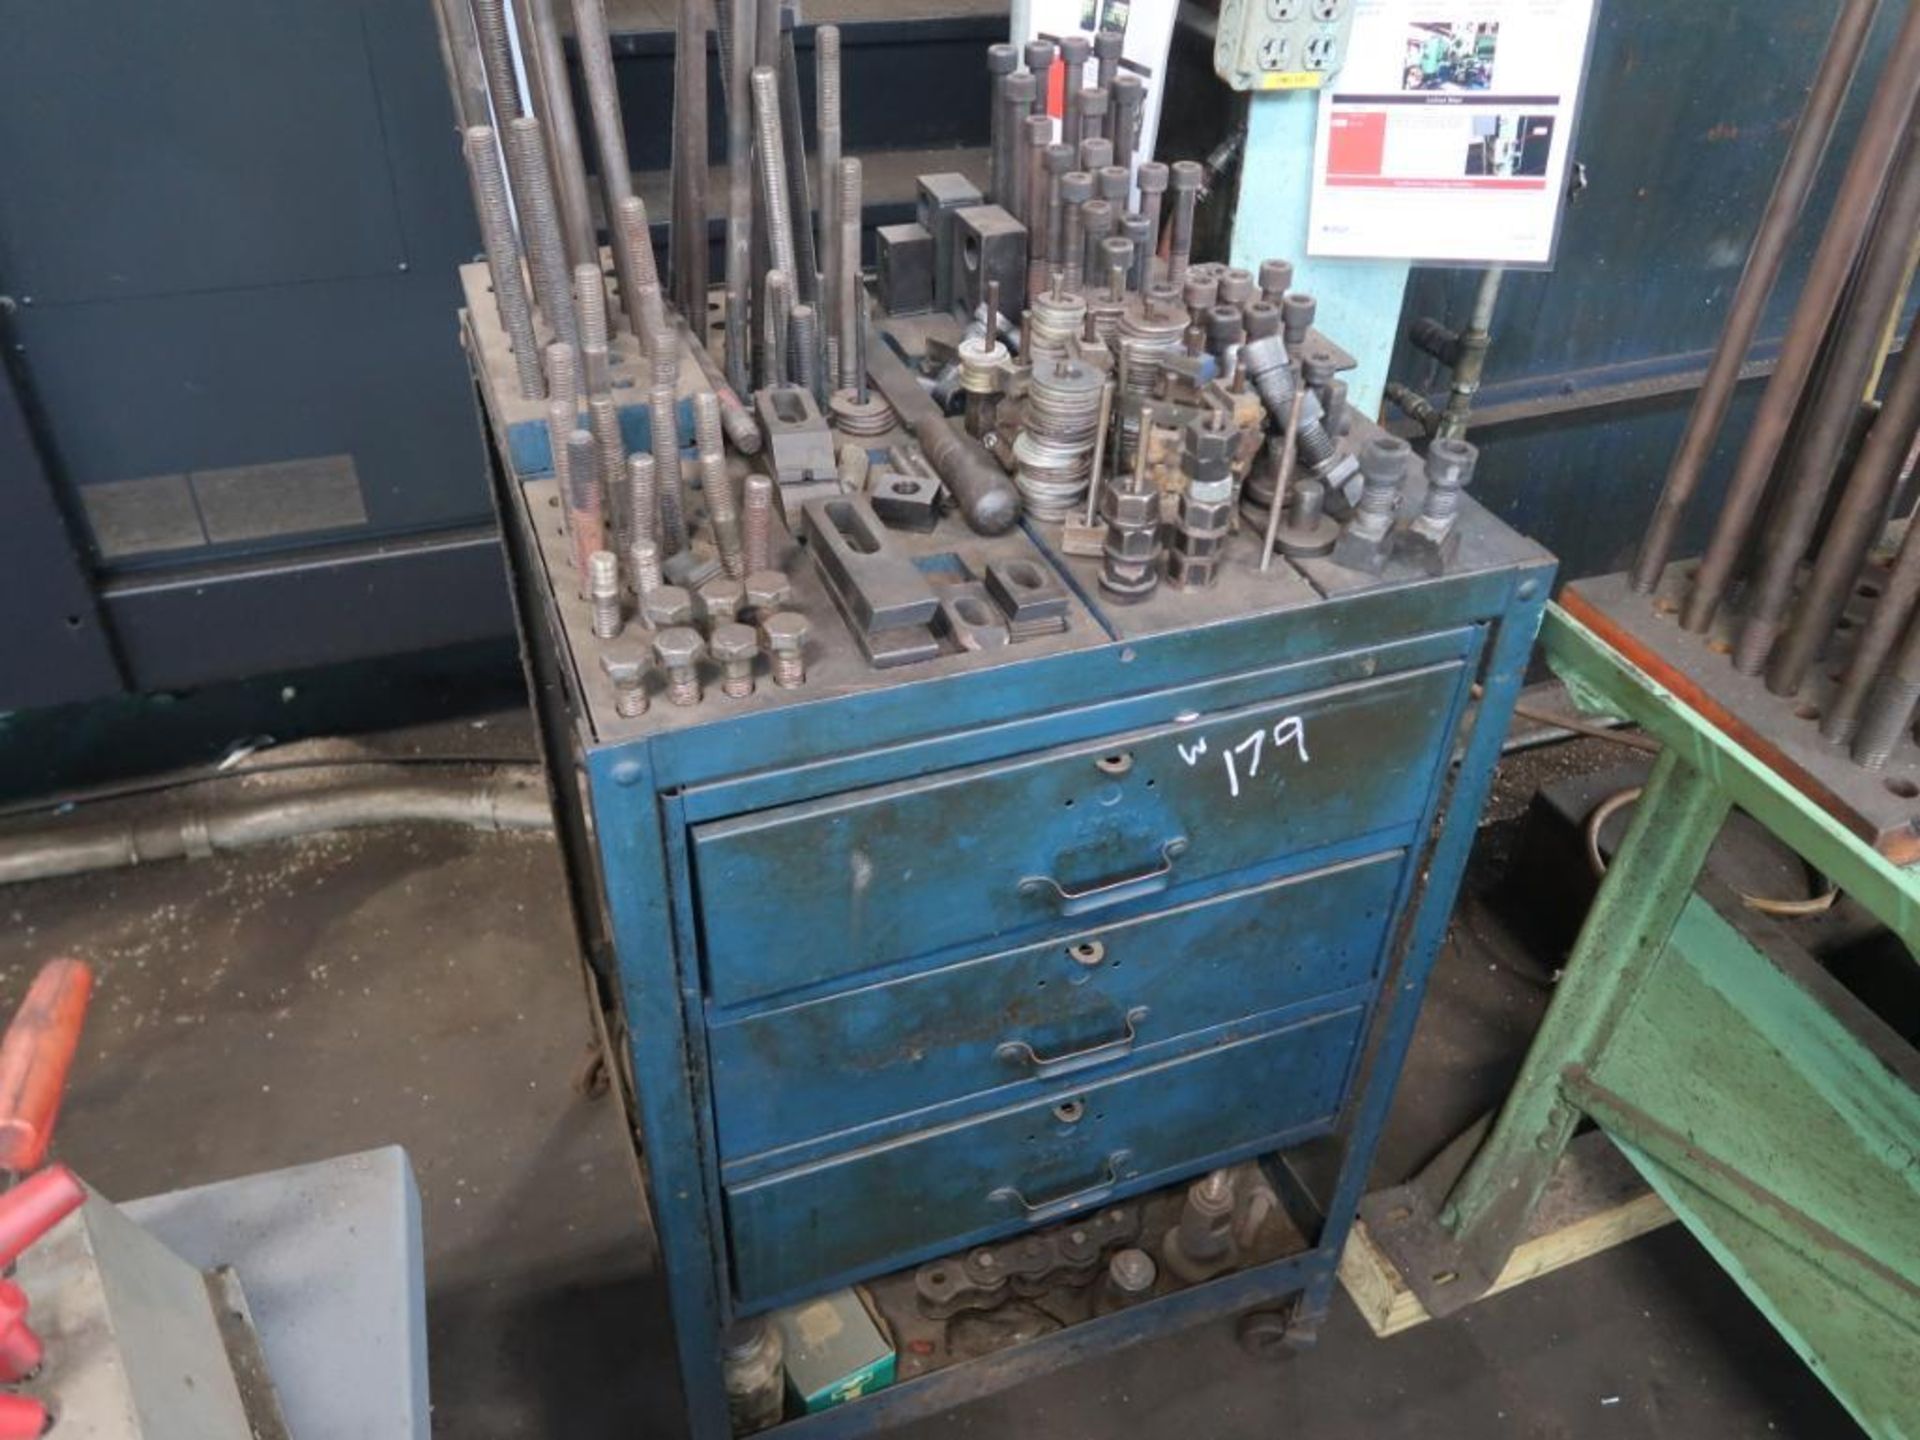 LOT: Wilton 4-1/2 in. Torpedo Vise, Steel Table, Rolling Cabinet with Contents including Hold Downs, - Image 2 of 3